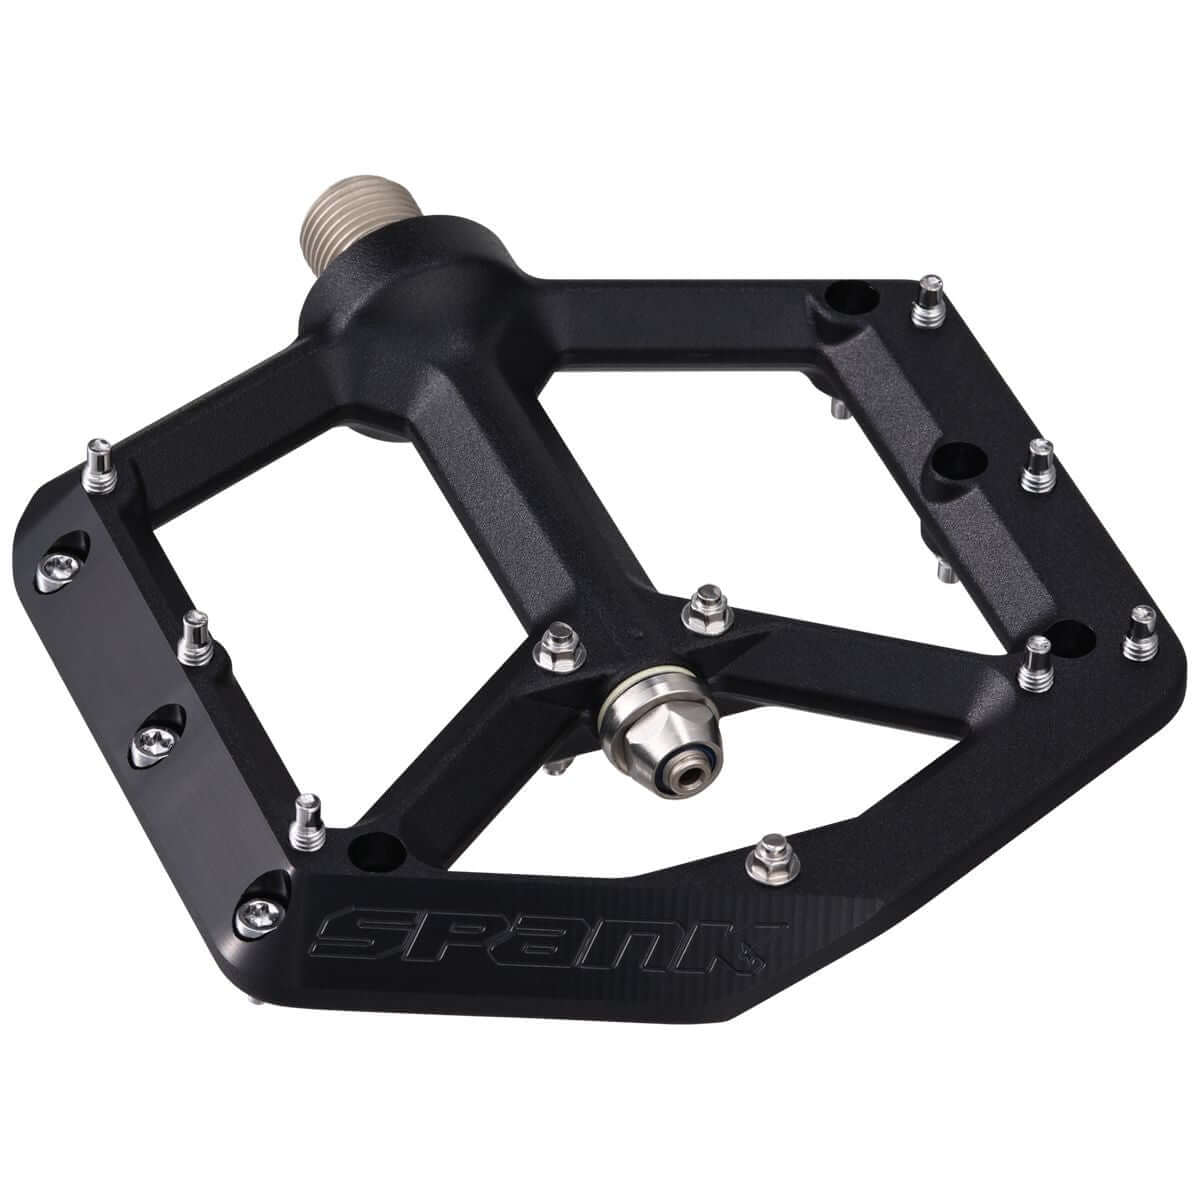 Spank Spike Reboot Pedals Pedals